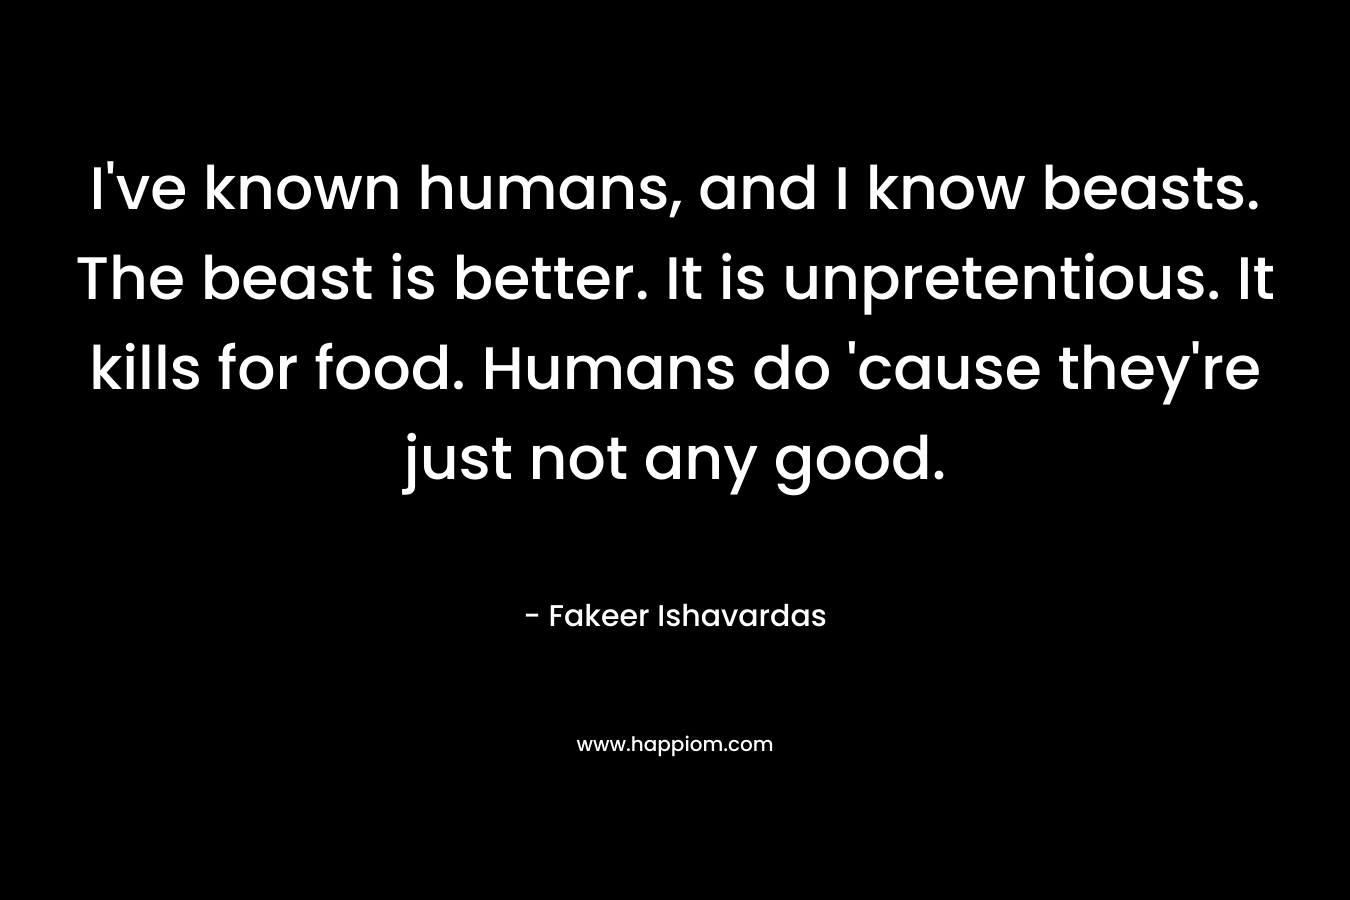 I’ve known humans, and I know beasts. The beast is better. It is unpretentious. It kills for food. Humans do ’cause they’re just not any good. – Fakeer Ishavardas